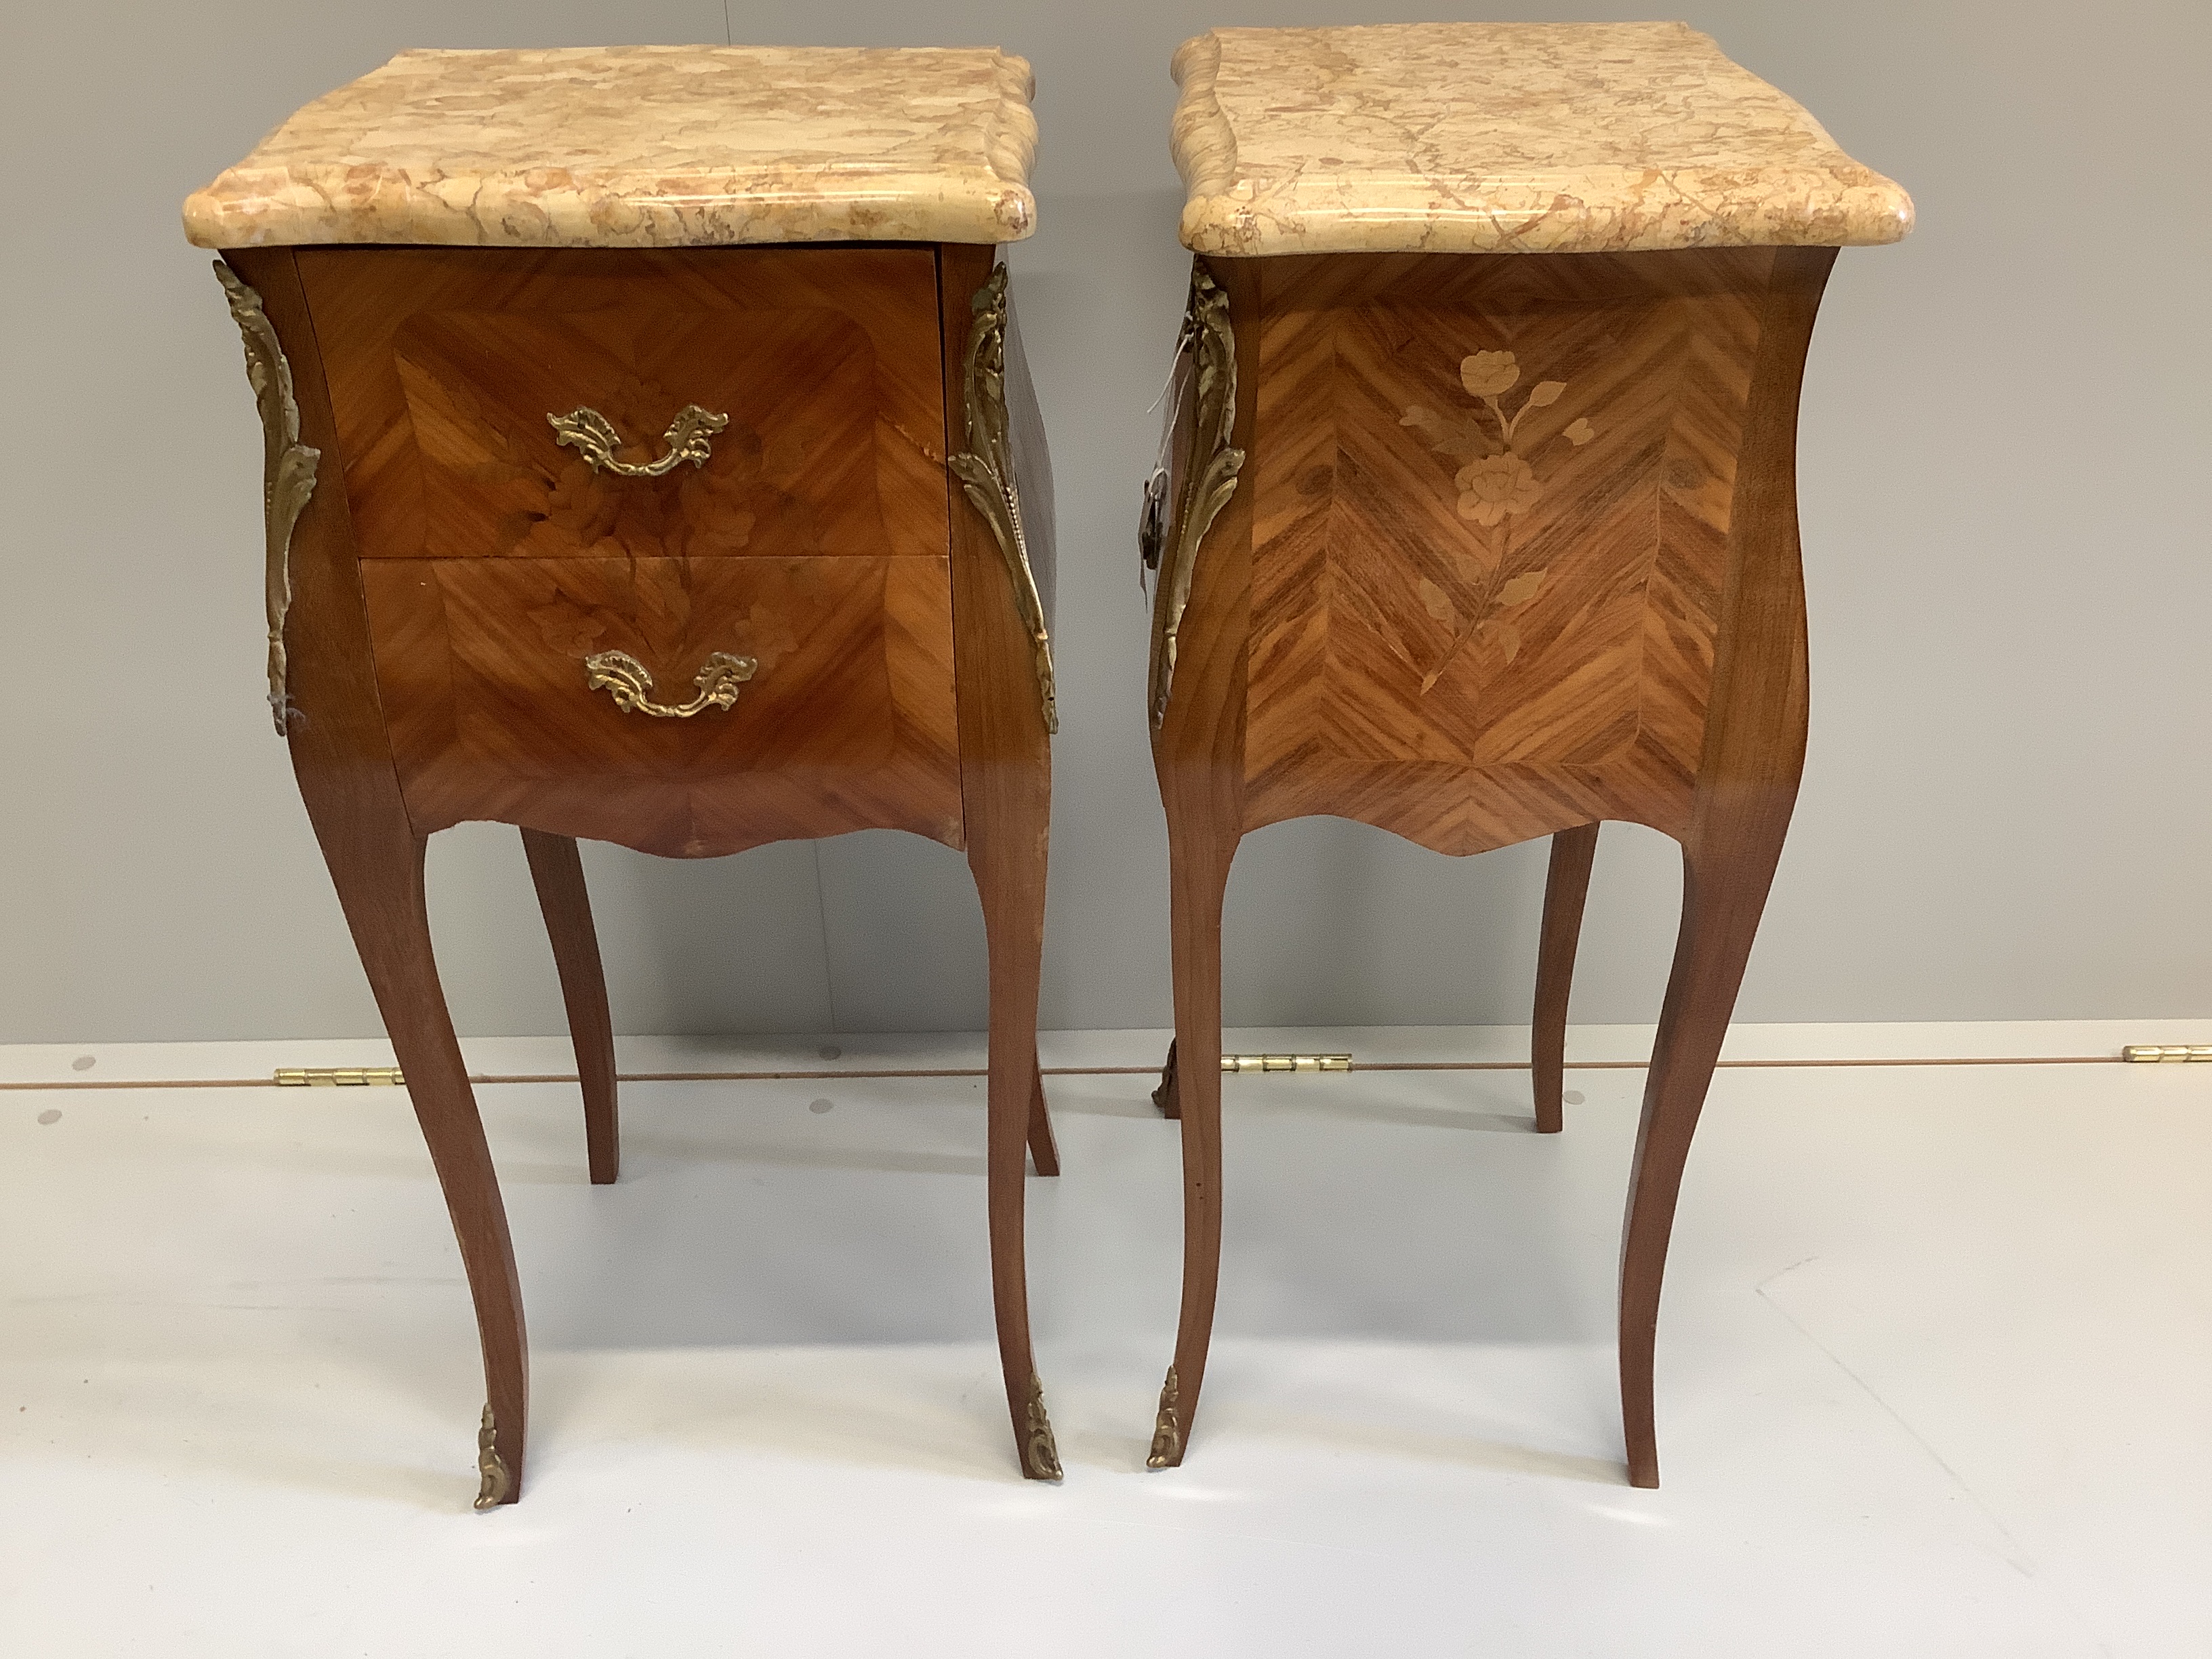 A pair of French Louis XVI style marquetry inlaid kingwood marble topped bedside cabinets, width 34cm, depth 28cm, height 74cm